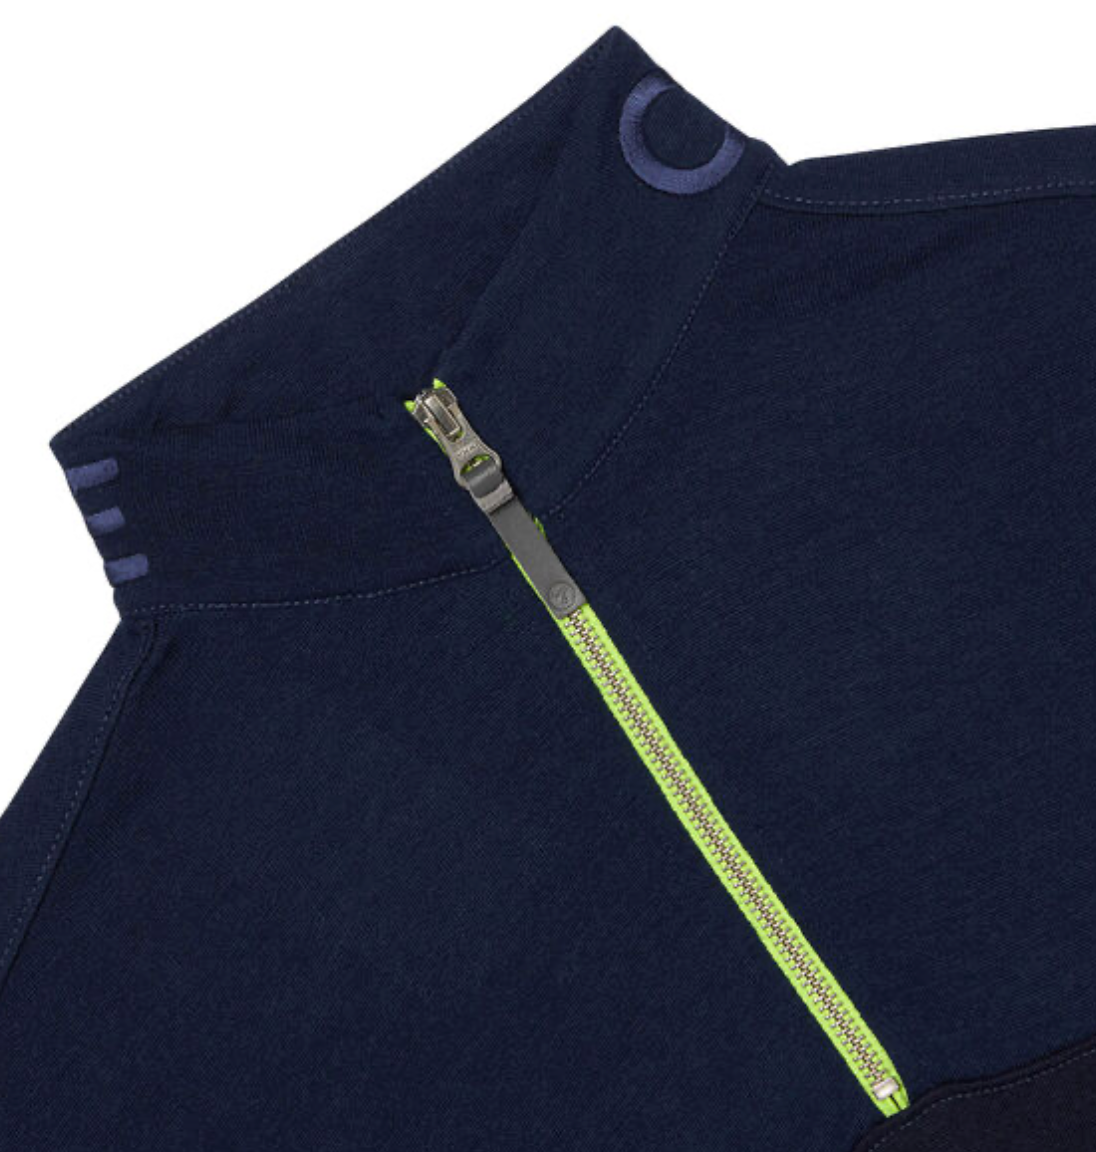 Oceantee Men's Manta Mid-Layer - 5 Sizes Available